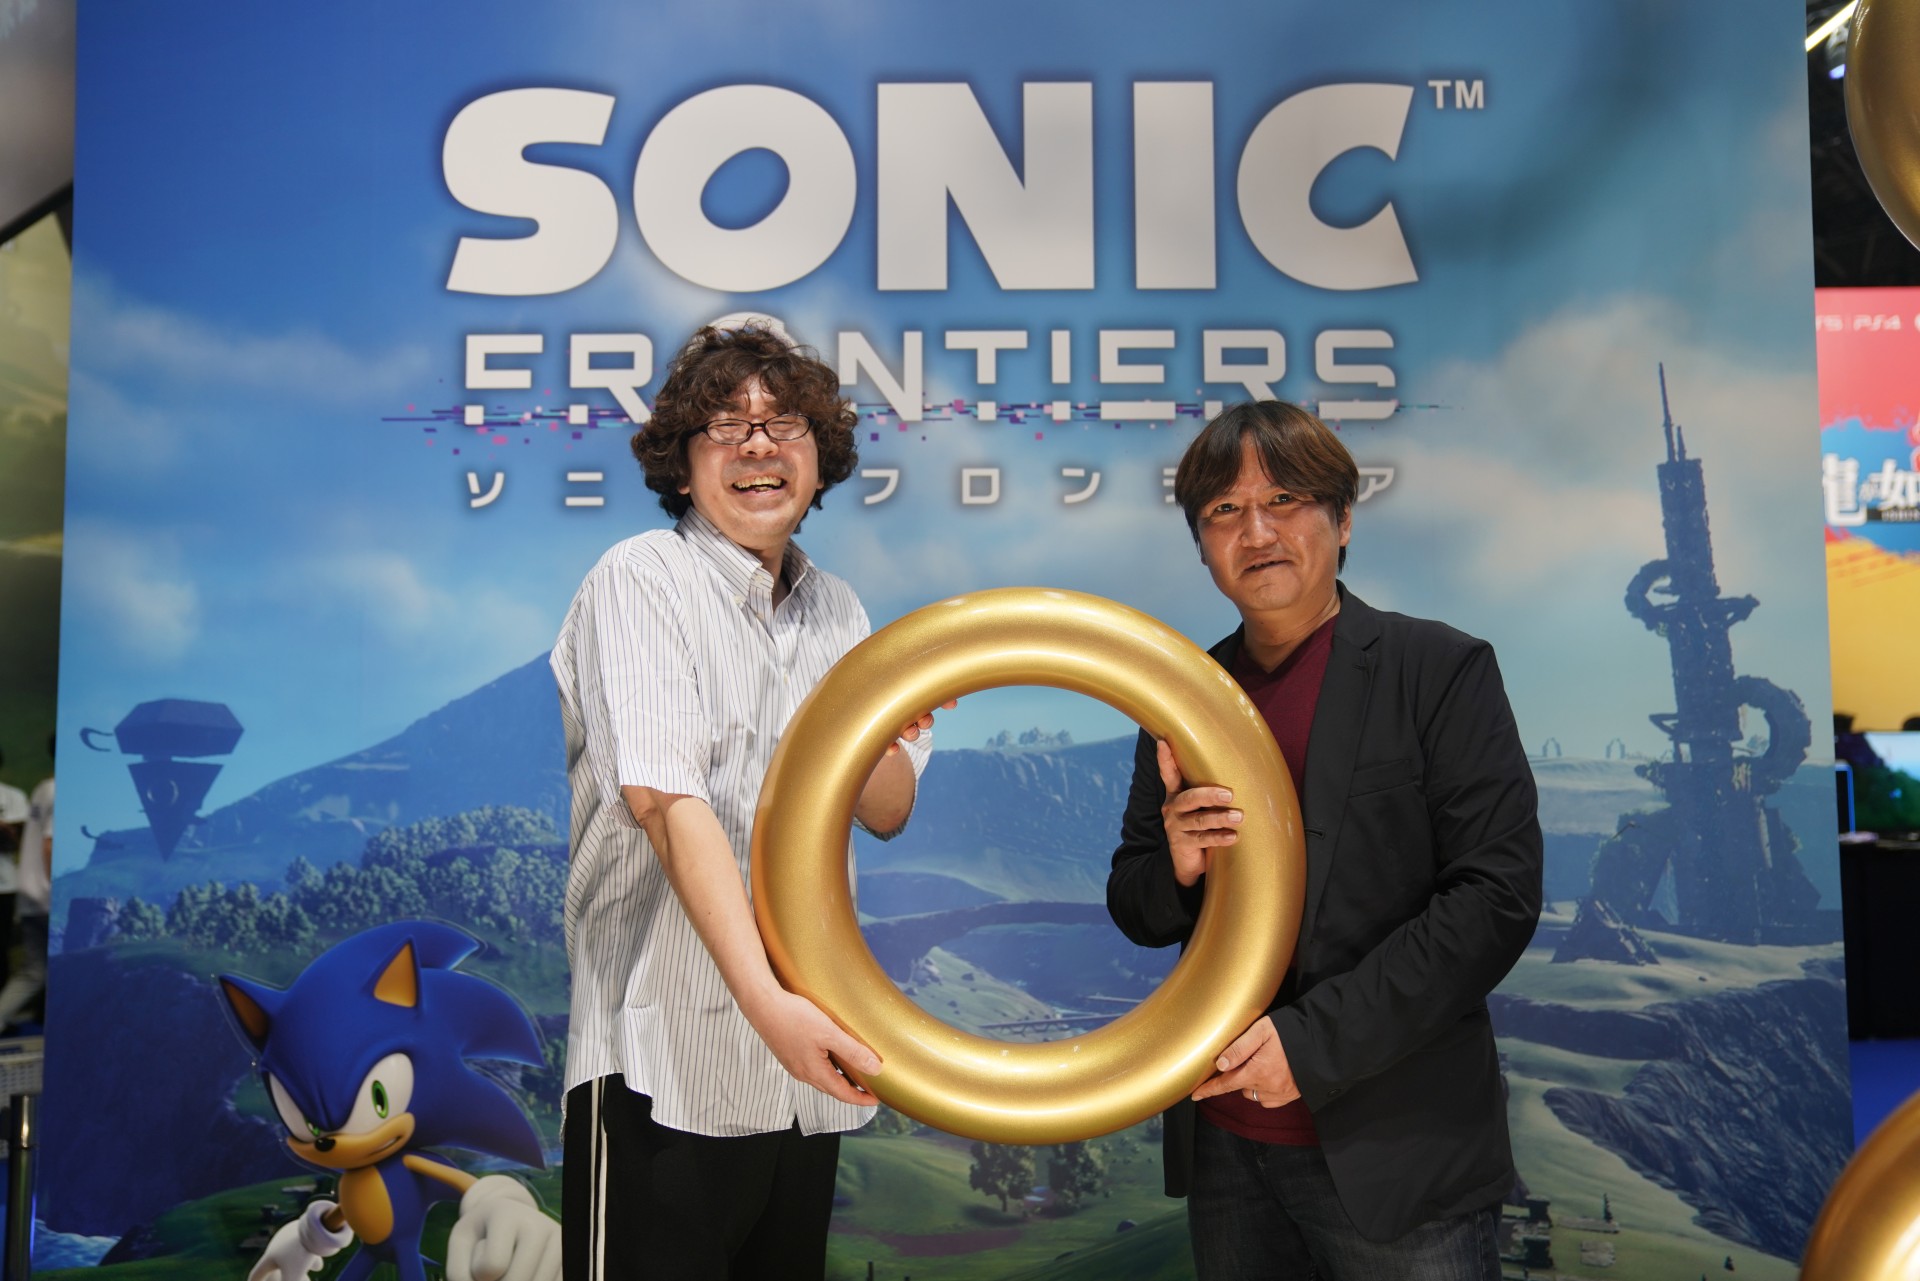 What are your expectations for Sonic Frontiers 2 now that Sega